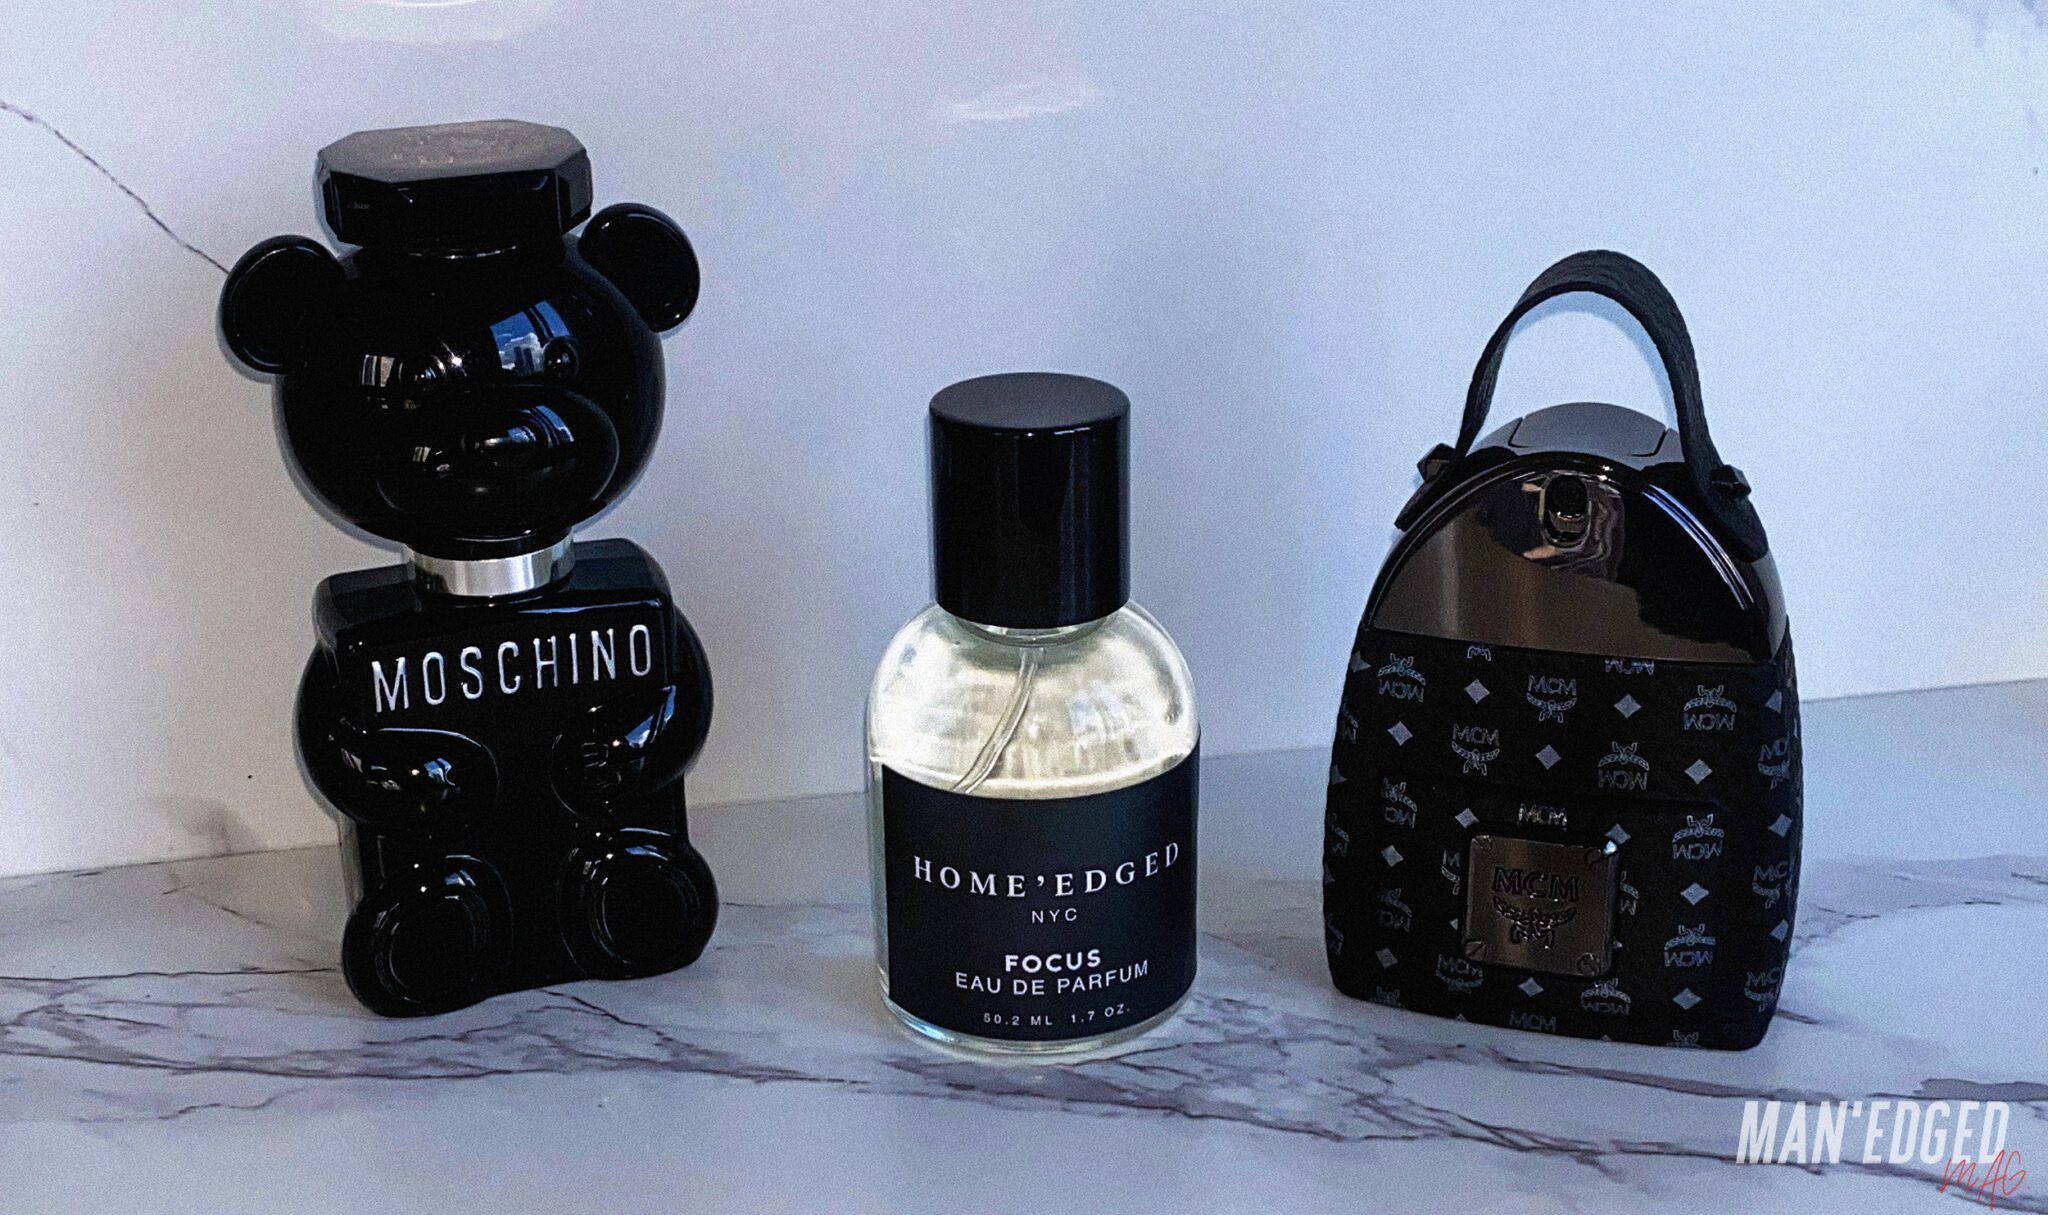 different types of colognes and their bottles